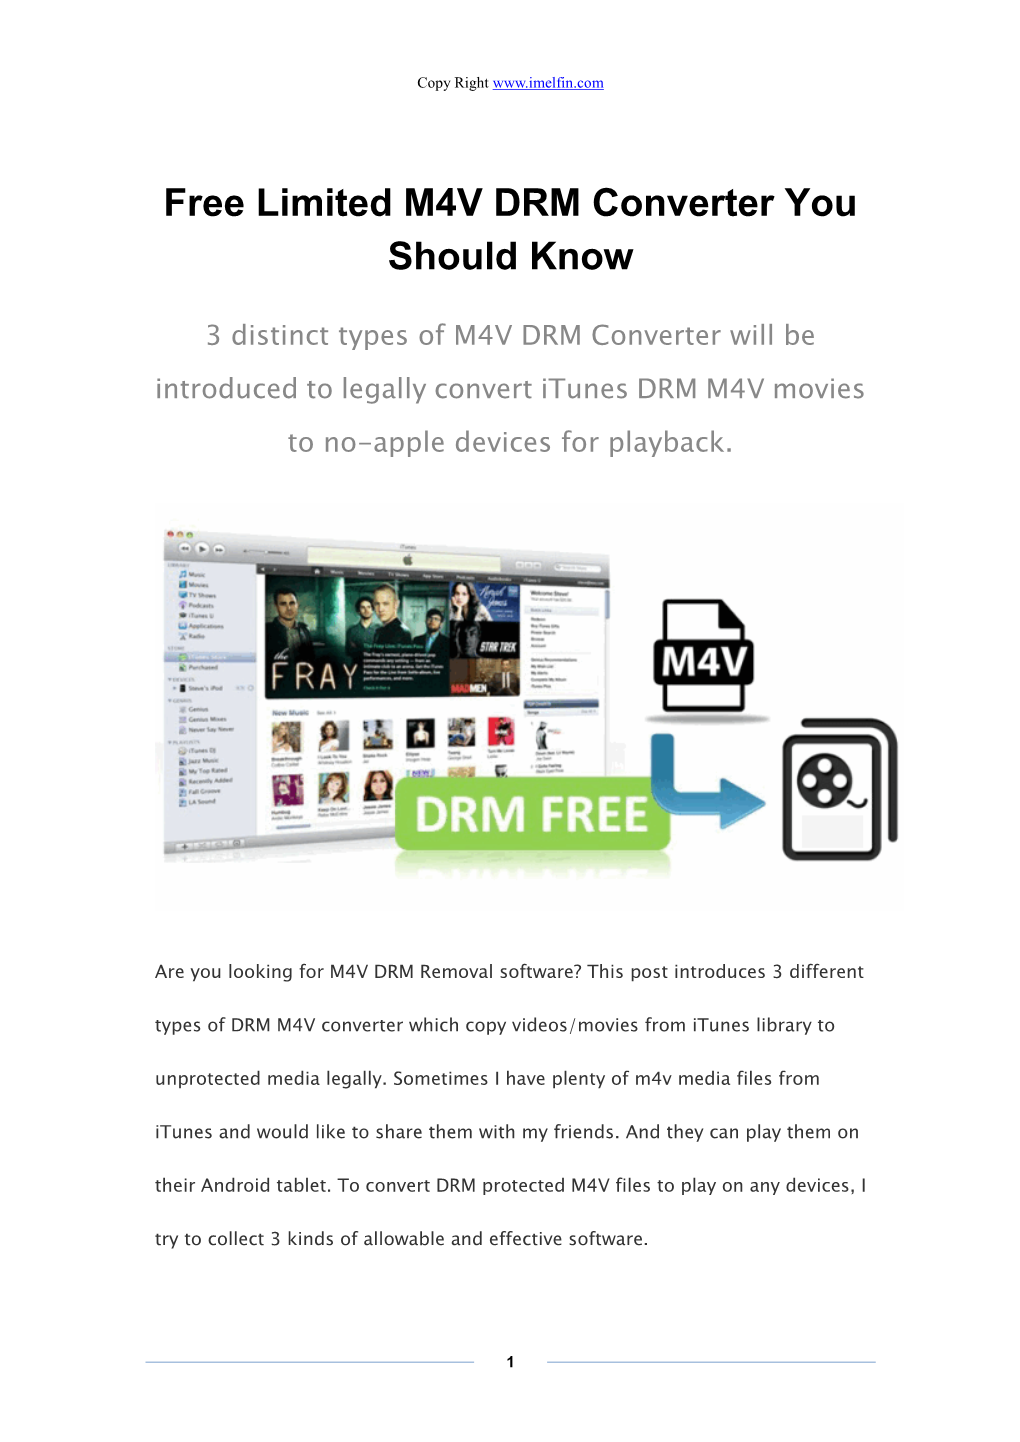 Free Limited M4V DRM Converter You Should Know